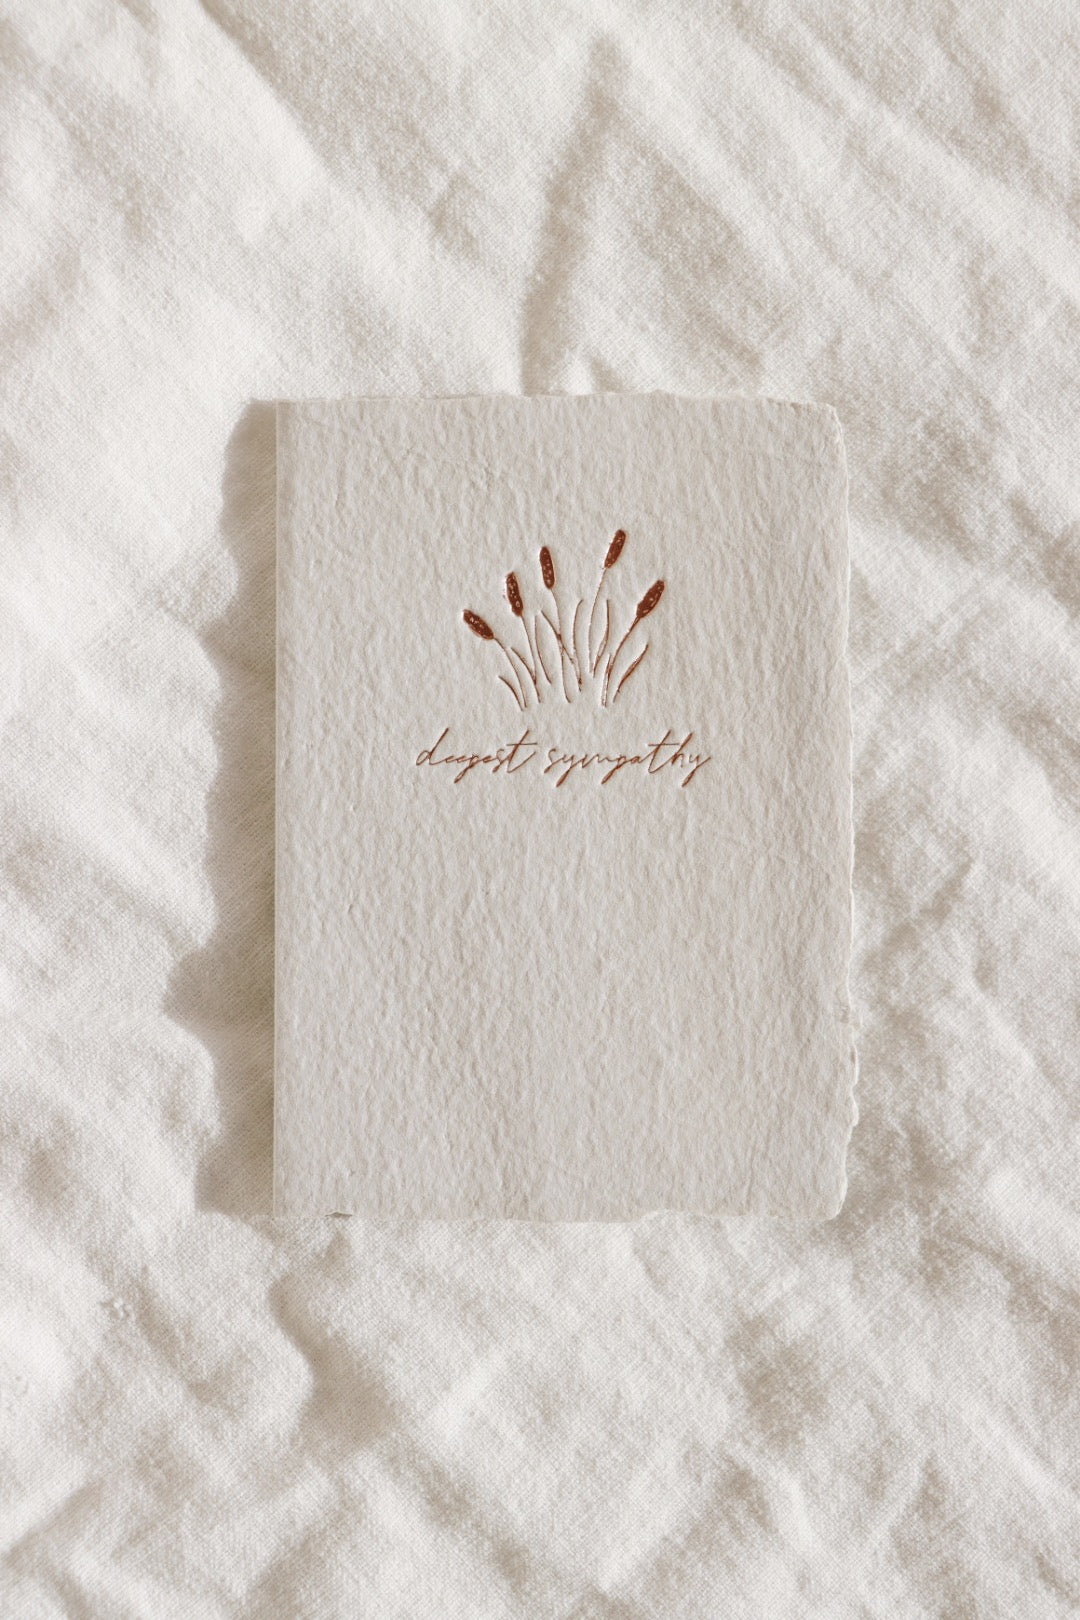 Deepest Sympathy Cattails Card